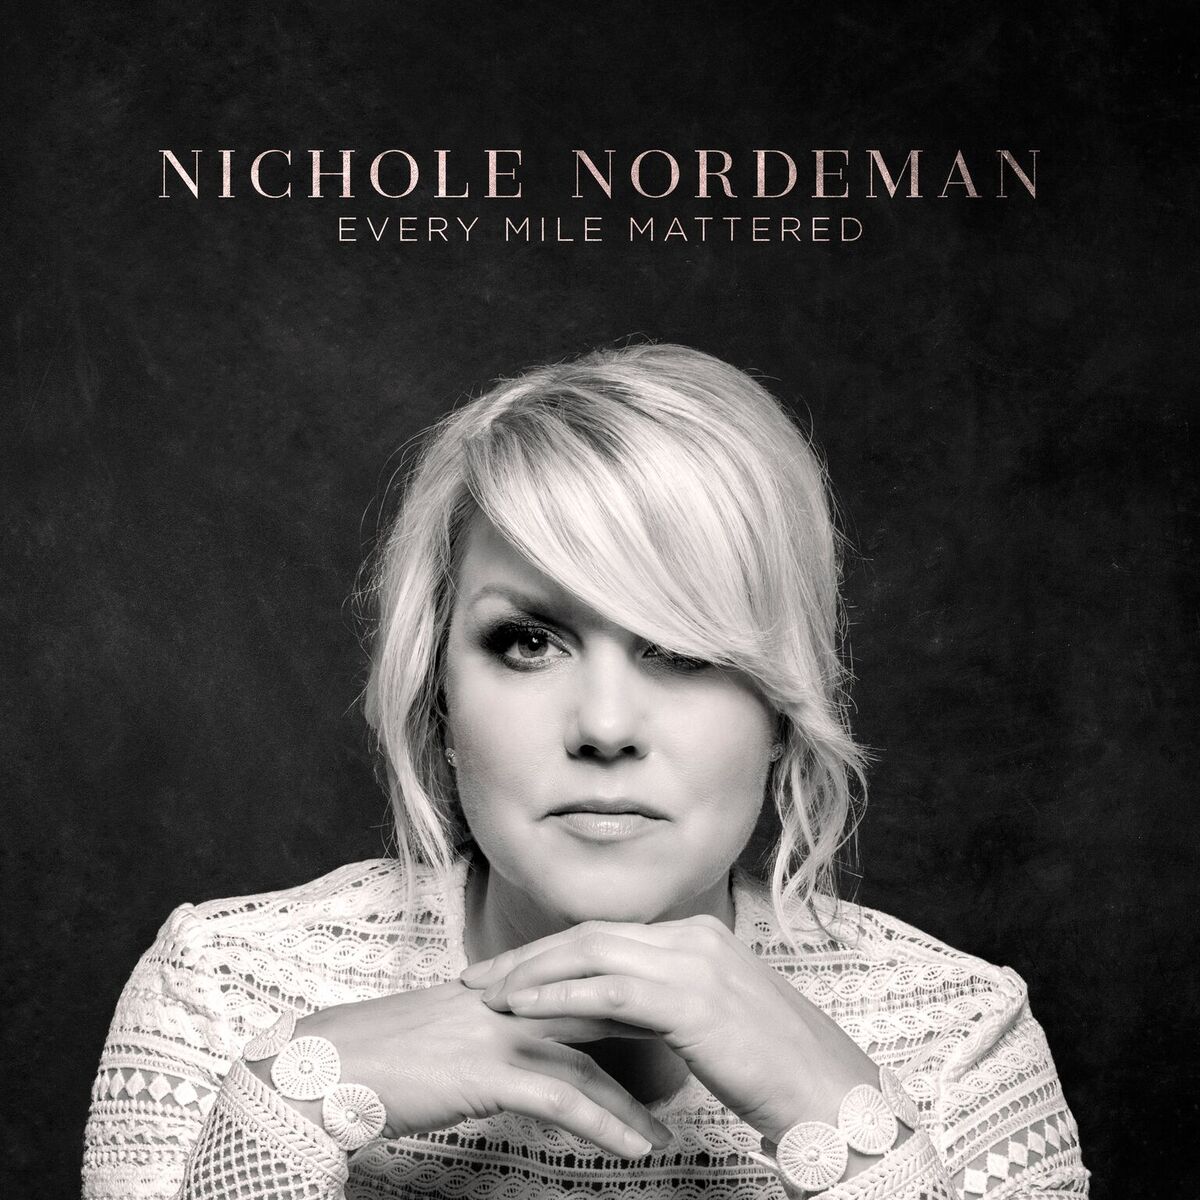 You are currently viewing CD REVIEW: Every Mile Mattered by Nichole Nordeman